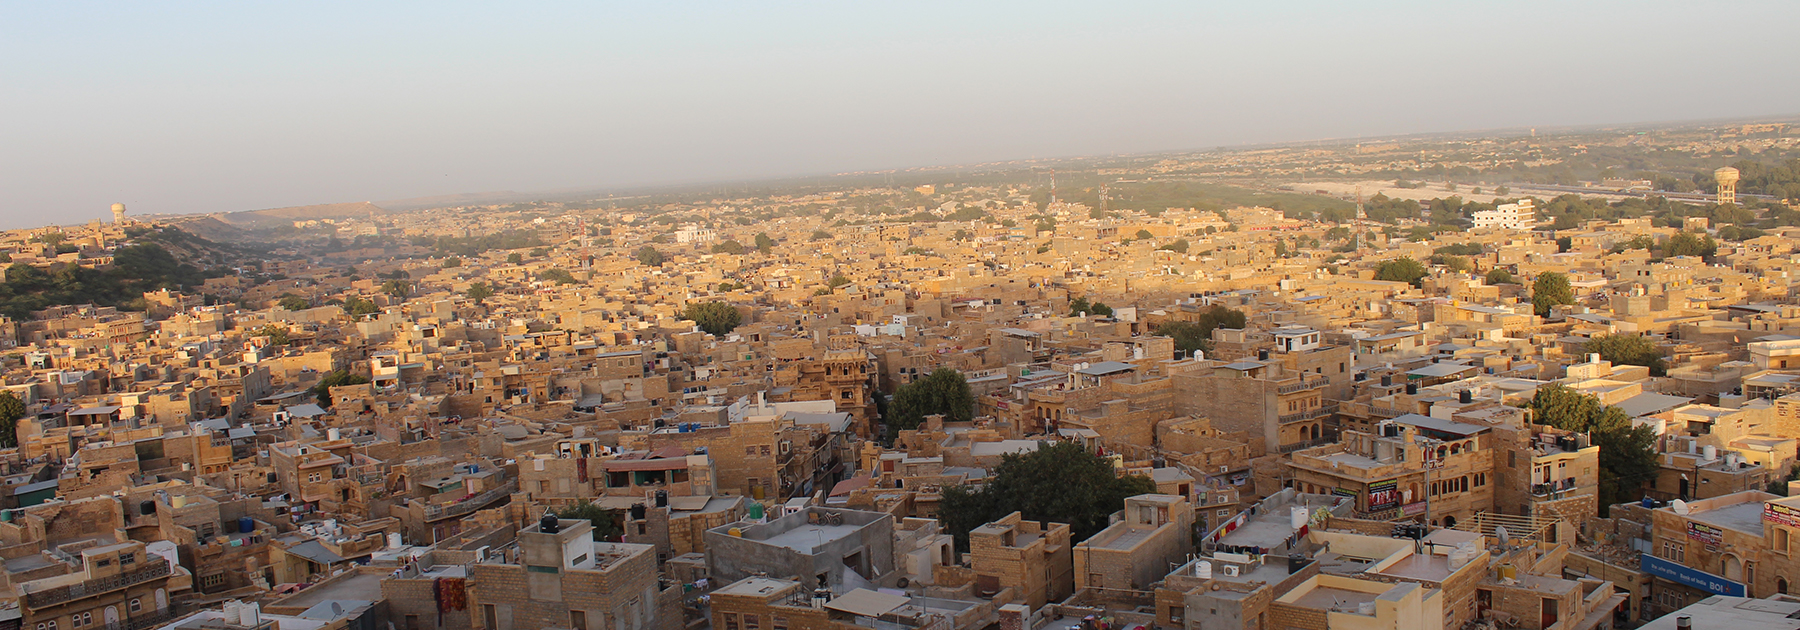 A view of the “Golden City”, Jaisalmer, from the top of the Jaisalmer fort. (Vivek2285, licensed under CC BY-SA 4.0)